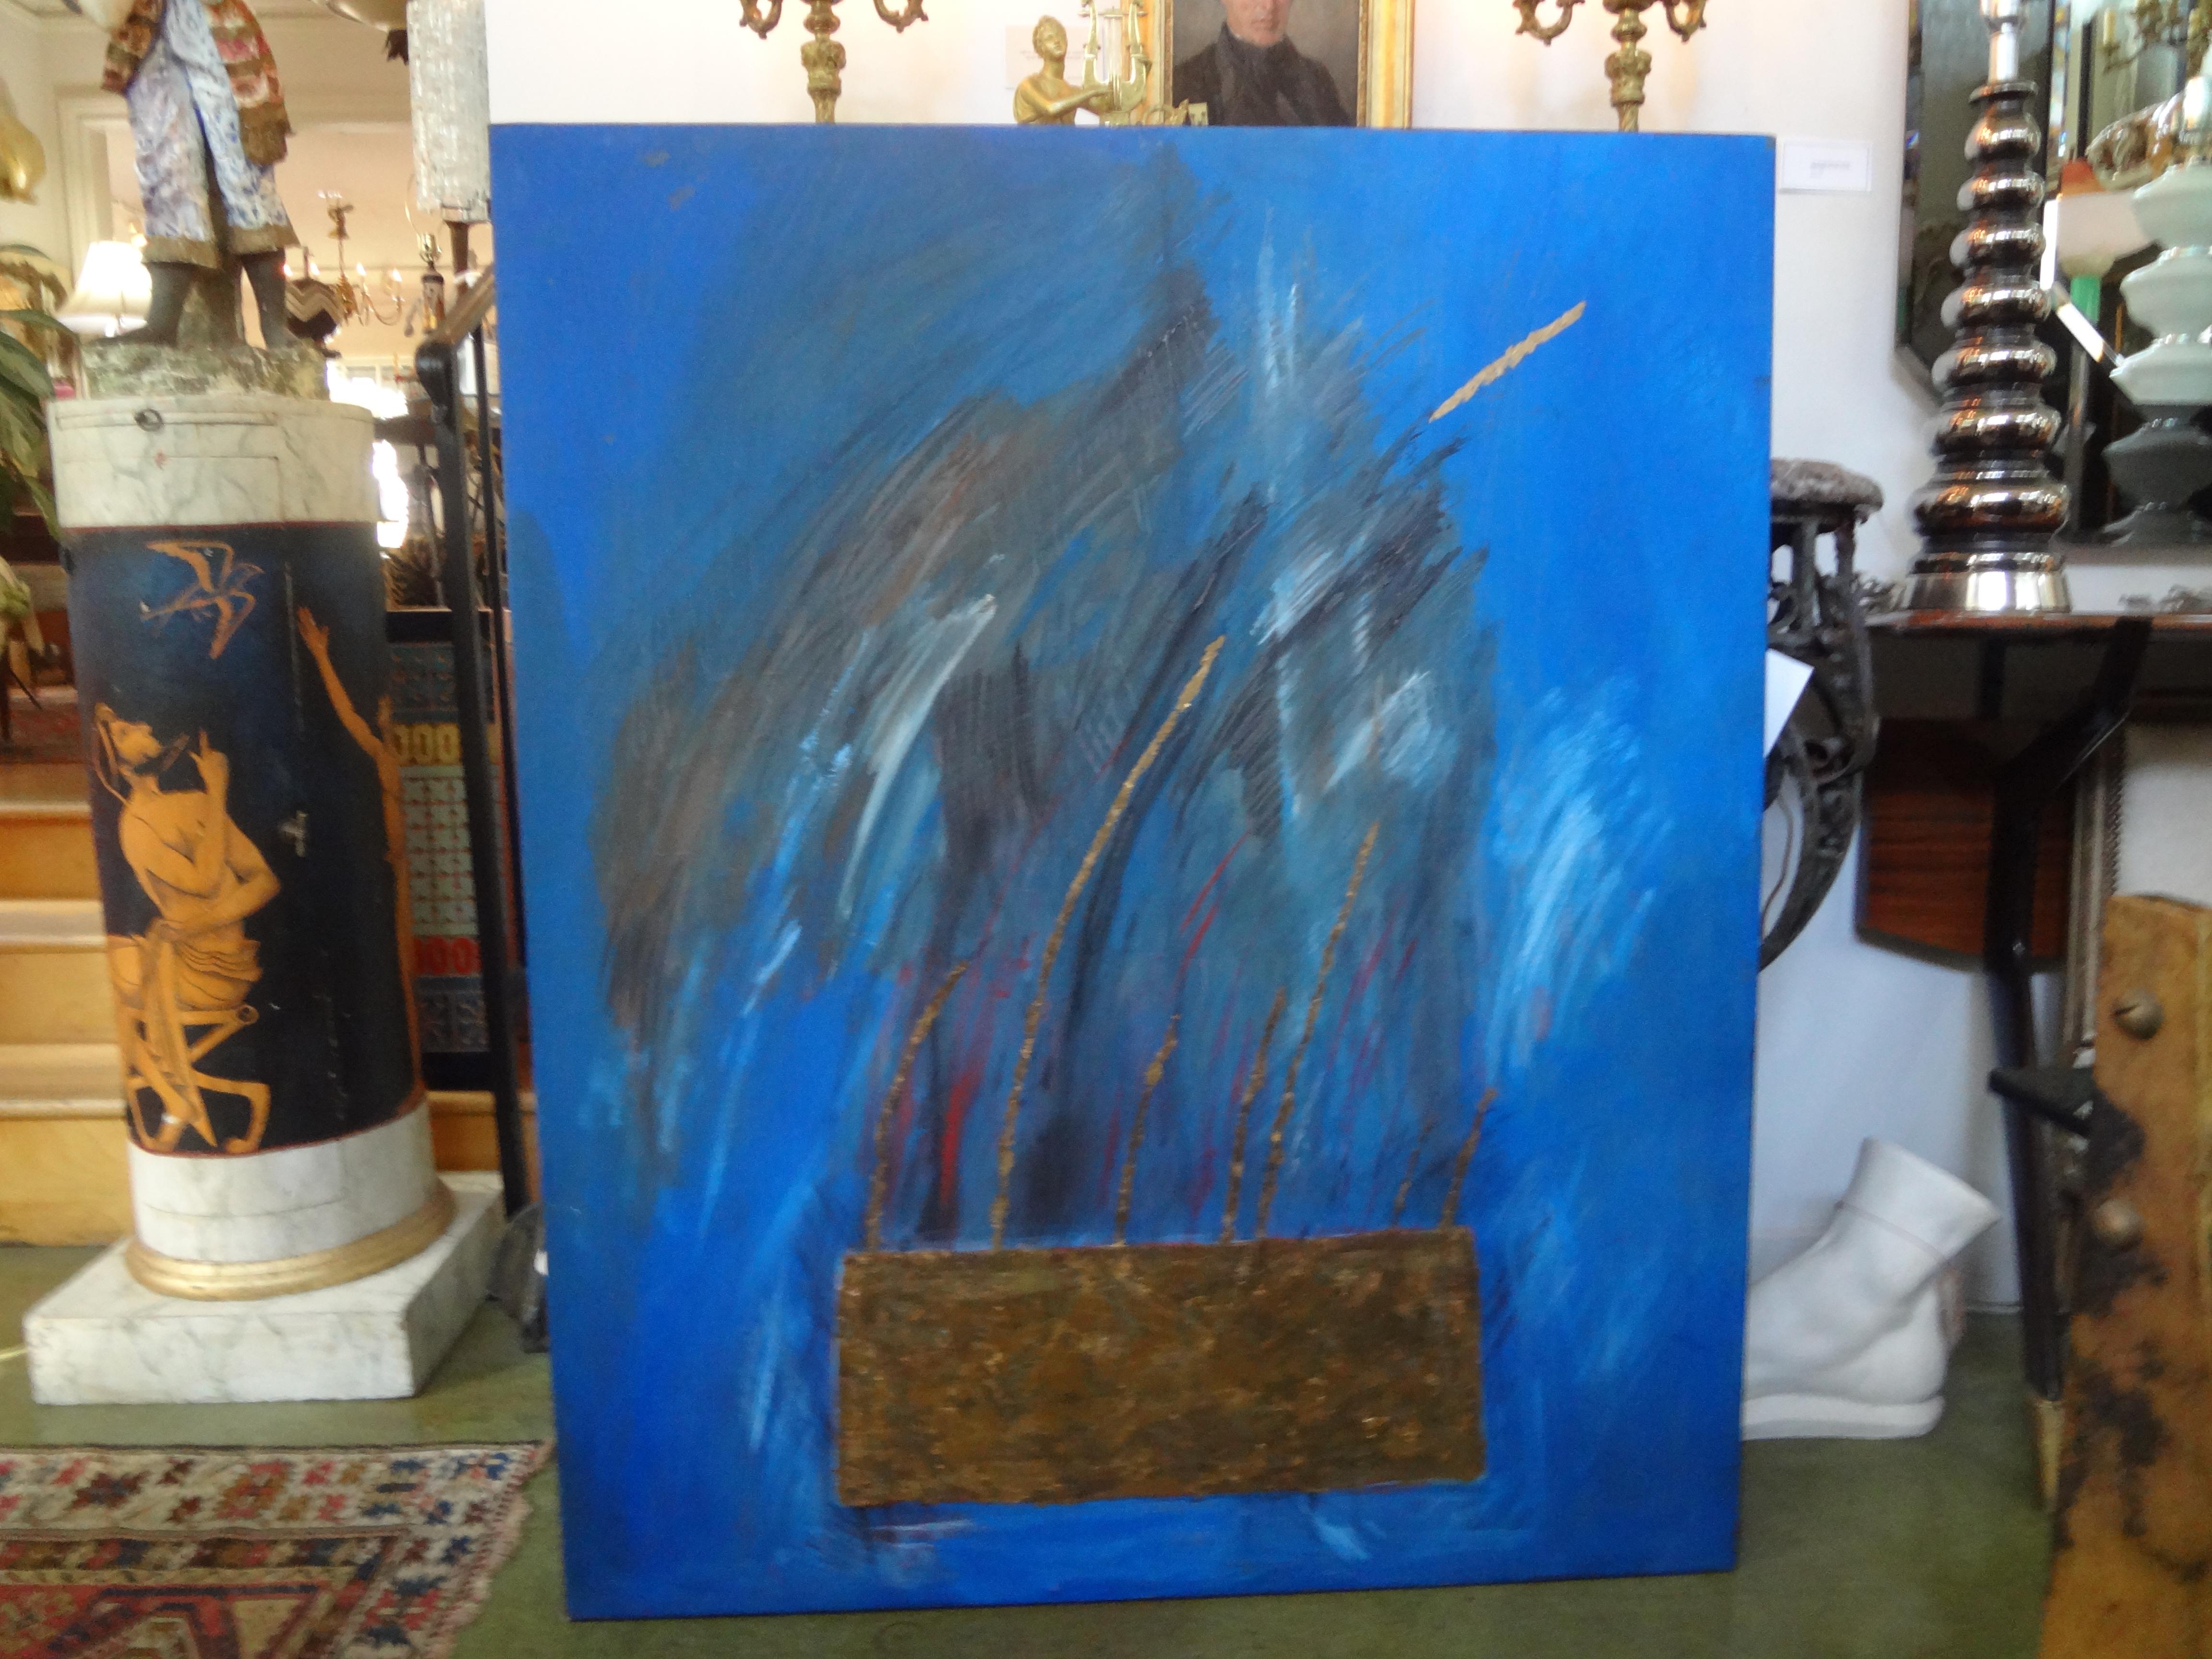 Italian abstract oil on canvas by Fausta Dossi, Milan, 2006.
Stunning abstract oil on canvas by noted Italian artist from Milan, Fausta Dossi, dated 2006.
Title: Arca dell'alleanza.
Copy of artist's gallery catalog included with the sale. See